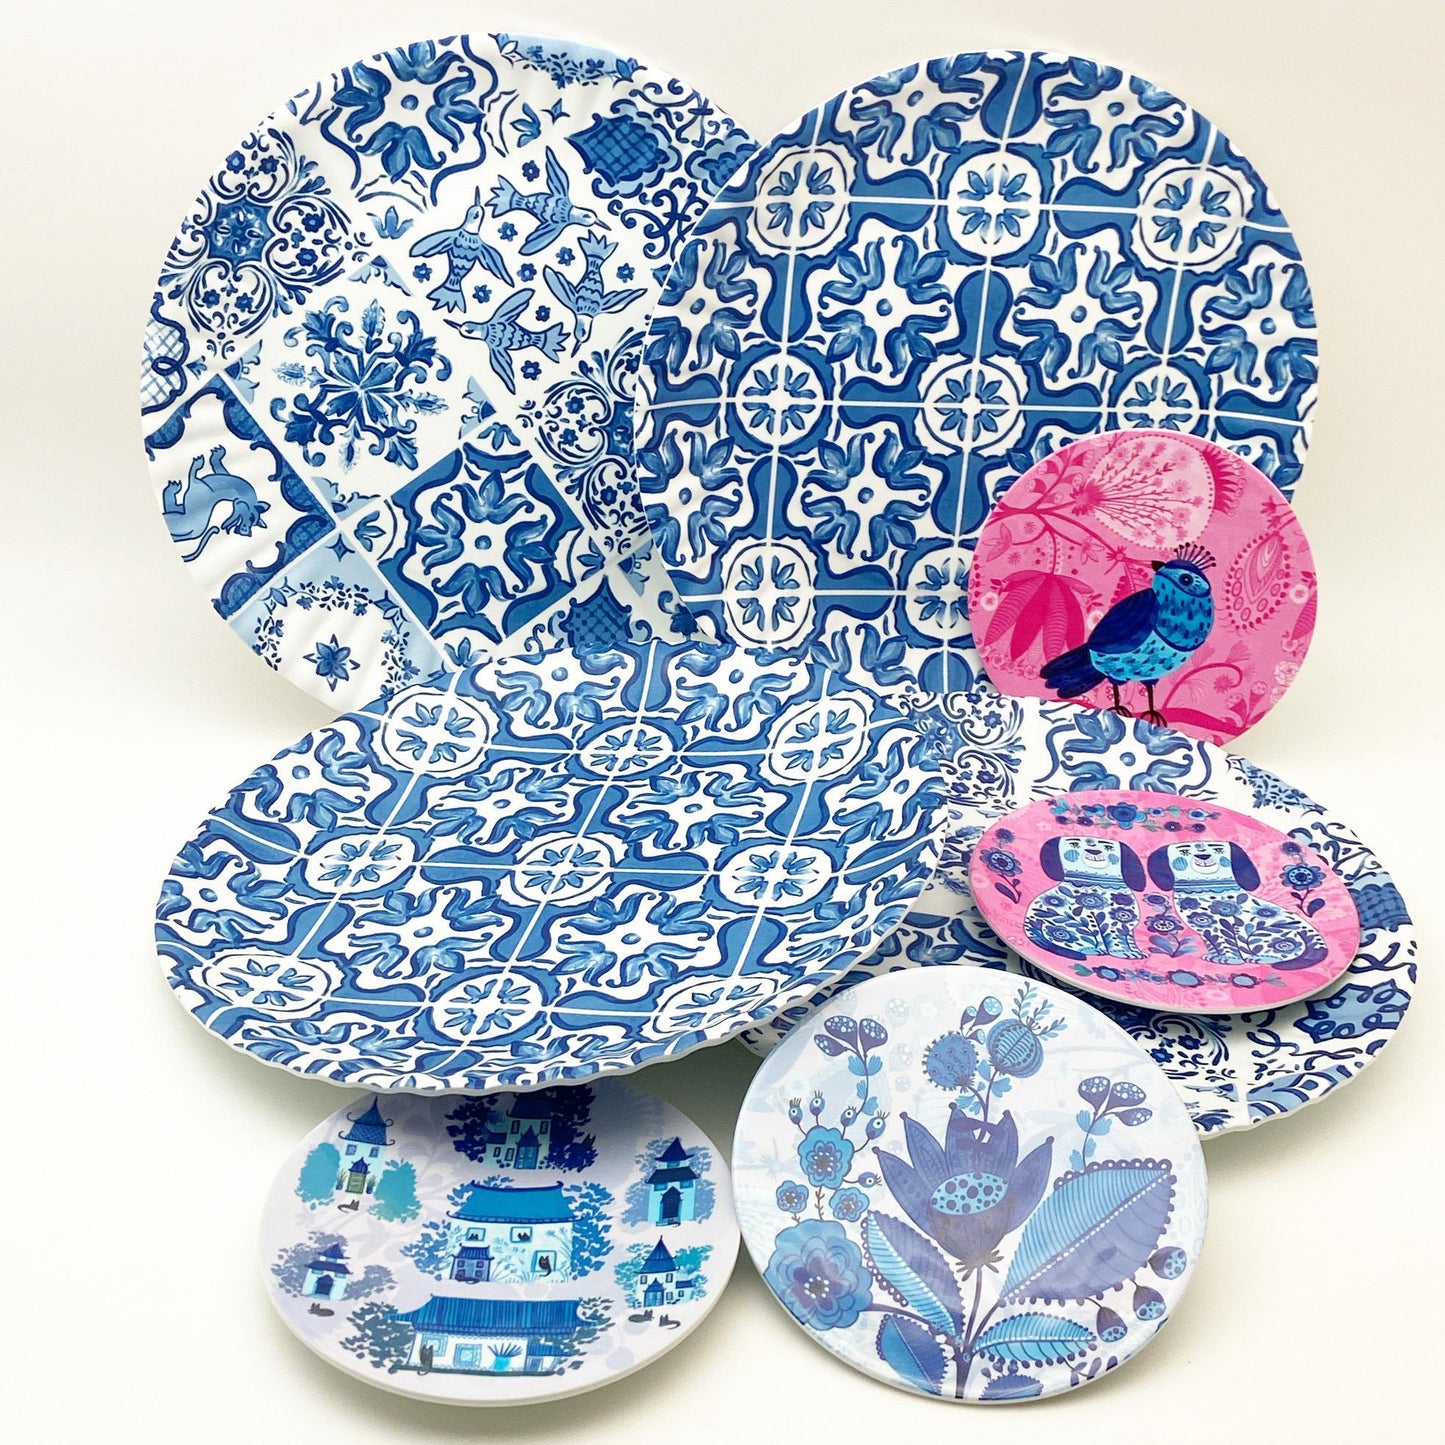 Plate - Melamine "Paper Plate" - Mixed Blue Tiles